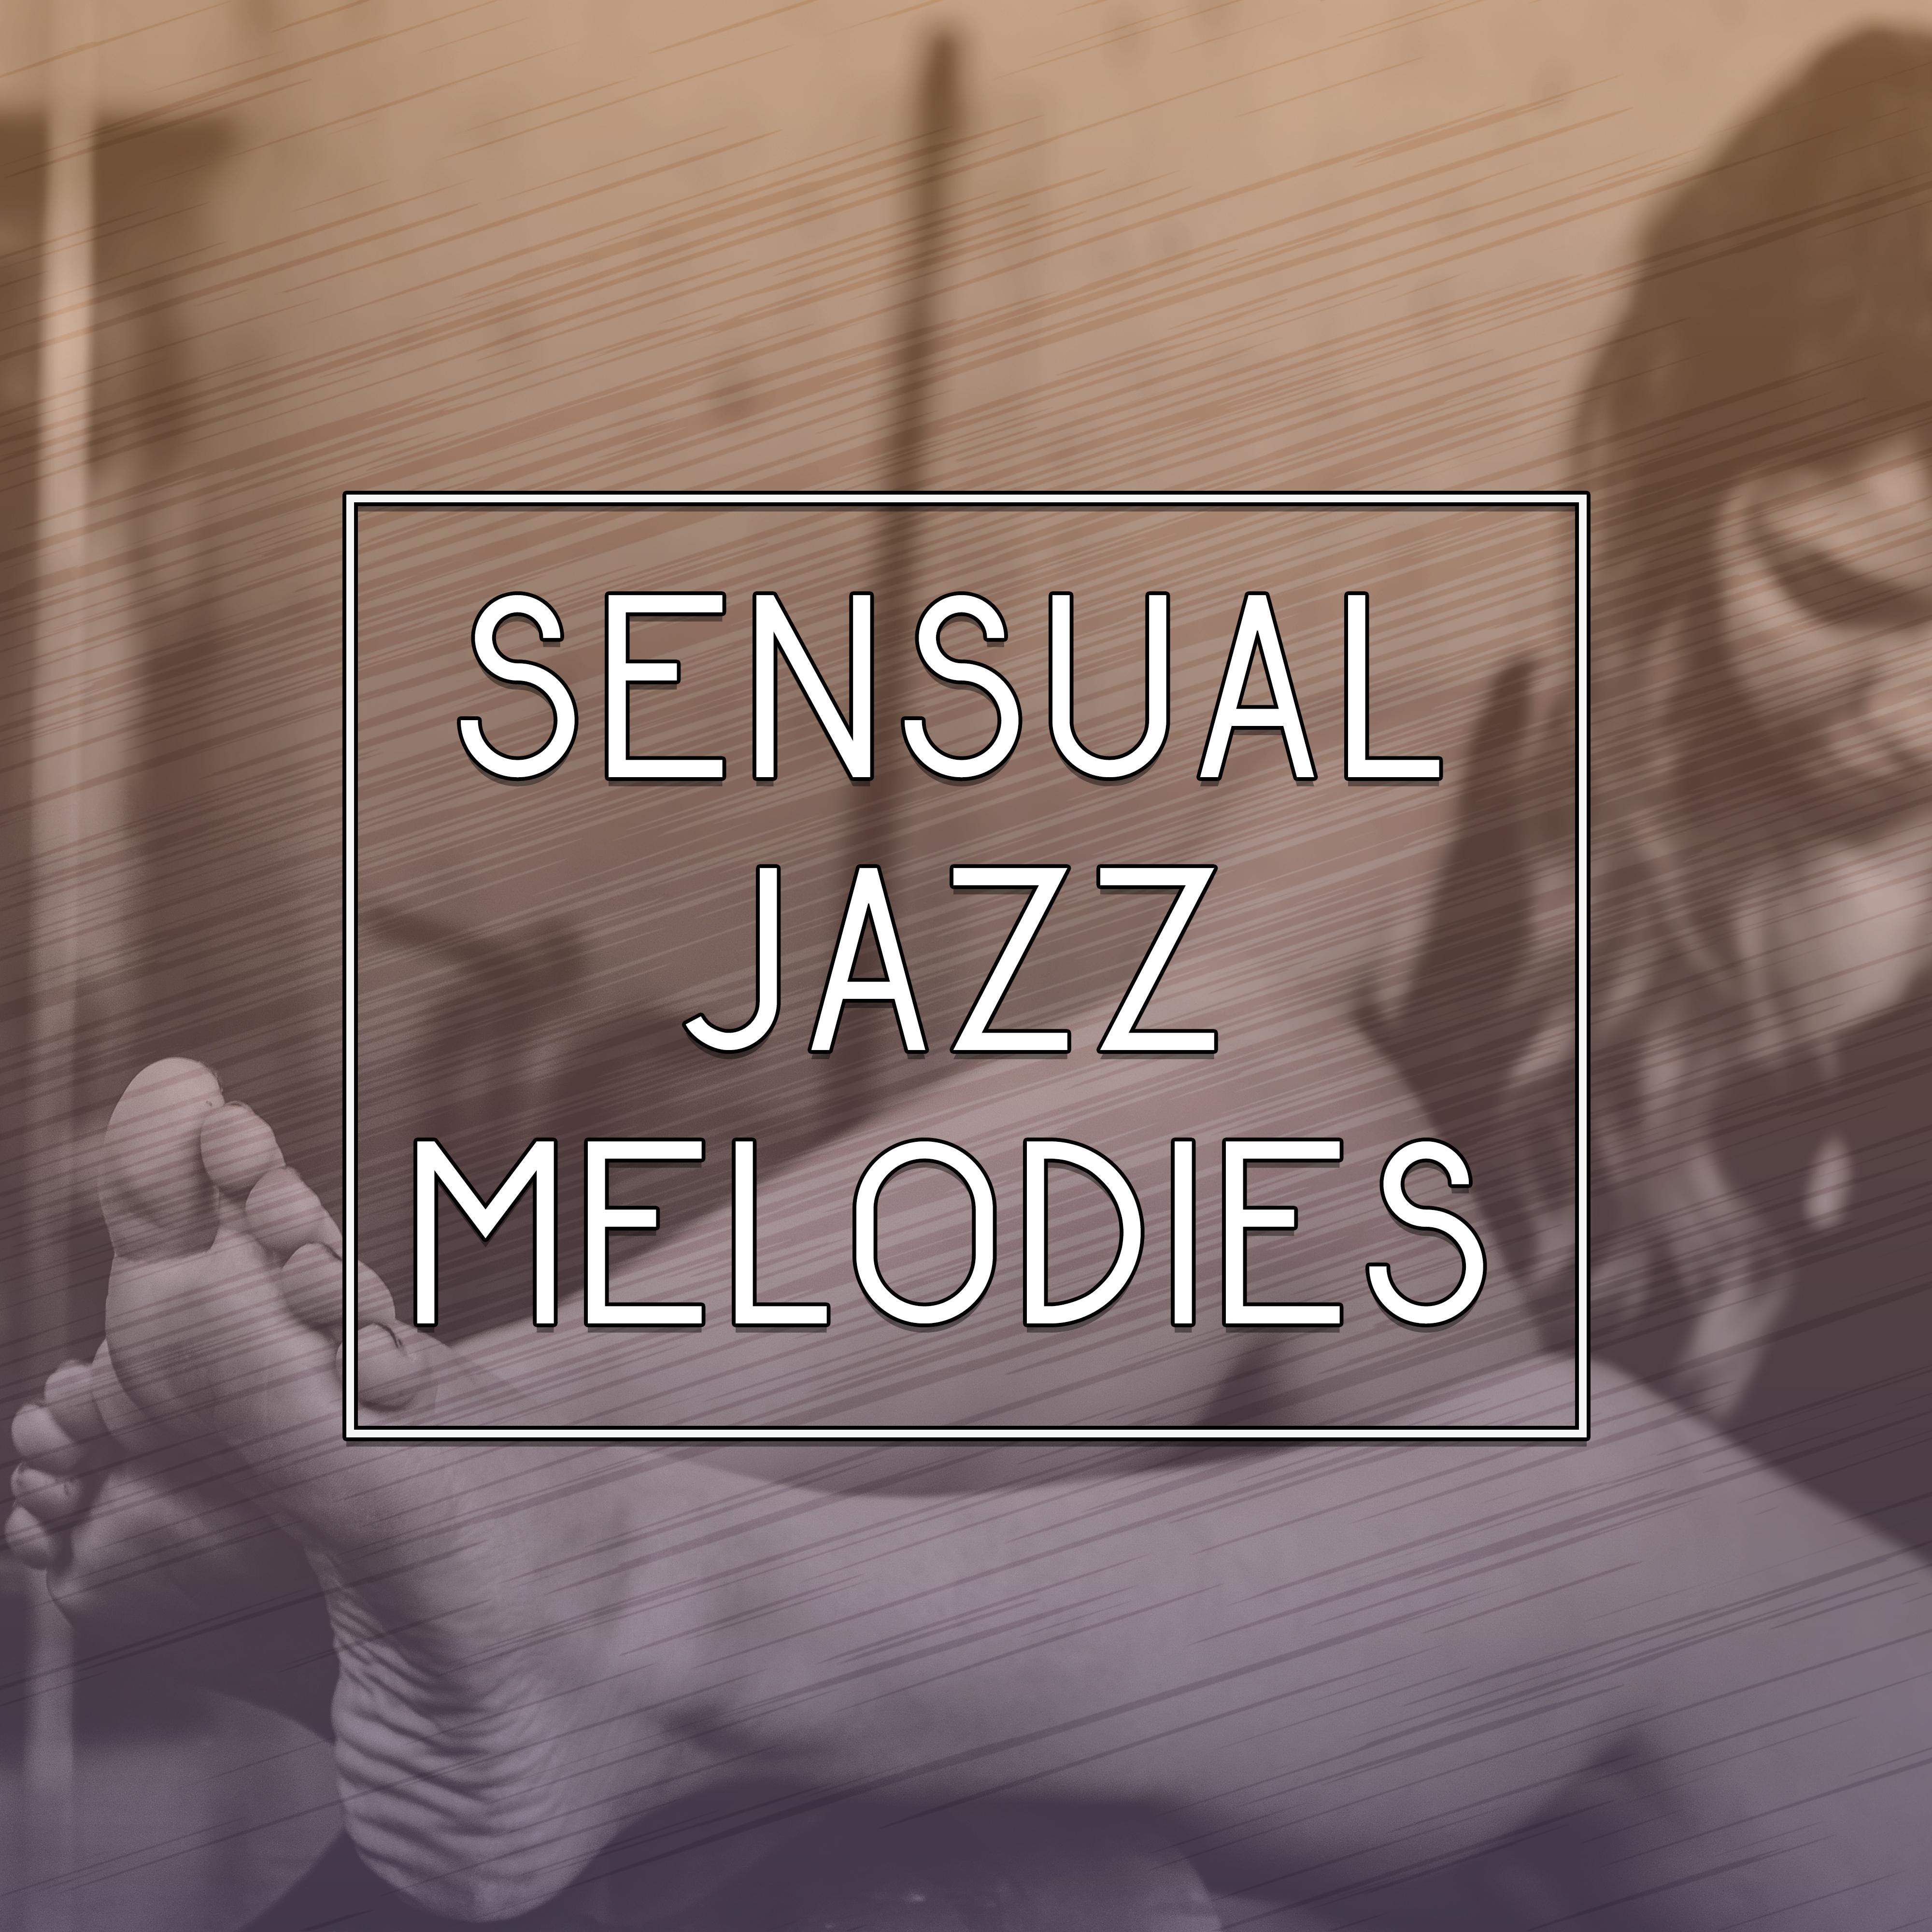 Sensual Jazz Melodies – Music for Romantic Dinner, Erotic Moves, Smooth Piano, Shades of Jazz